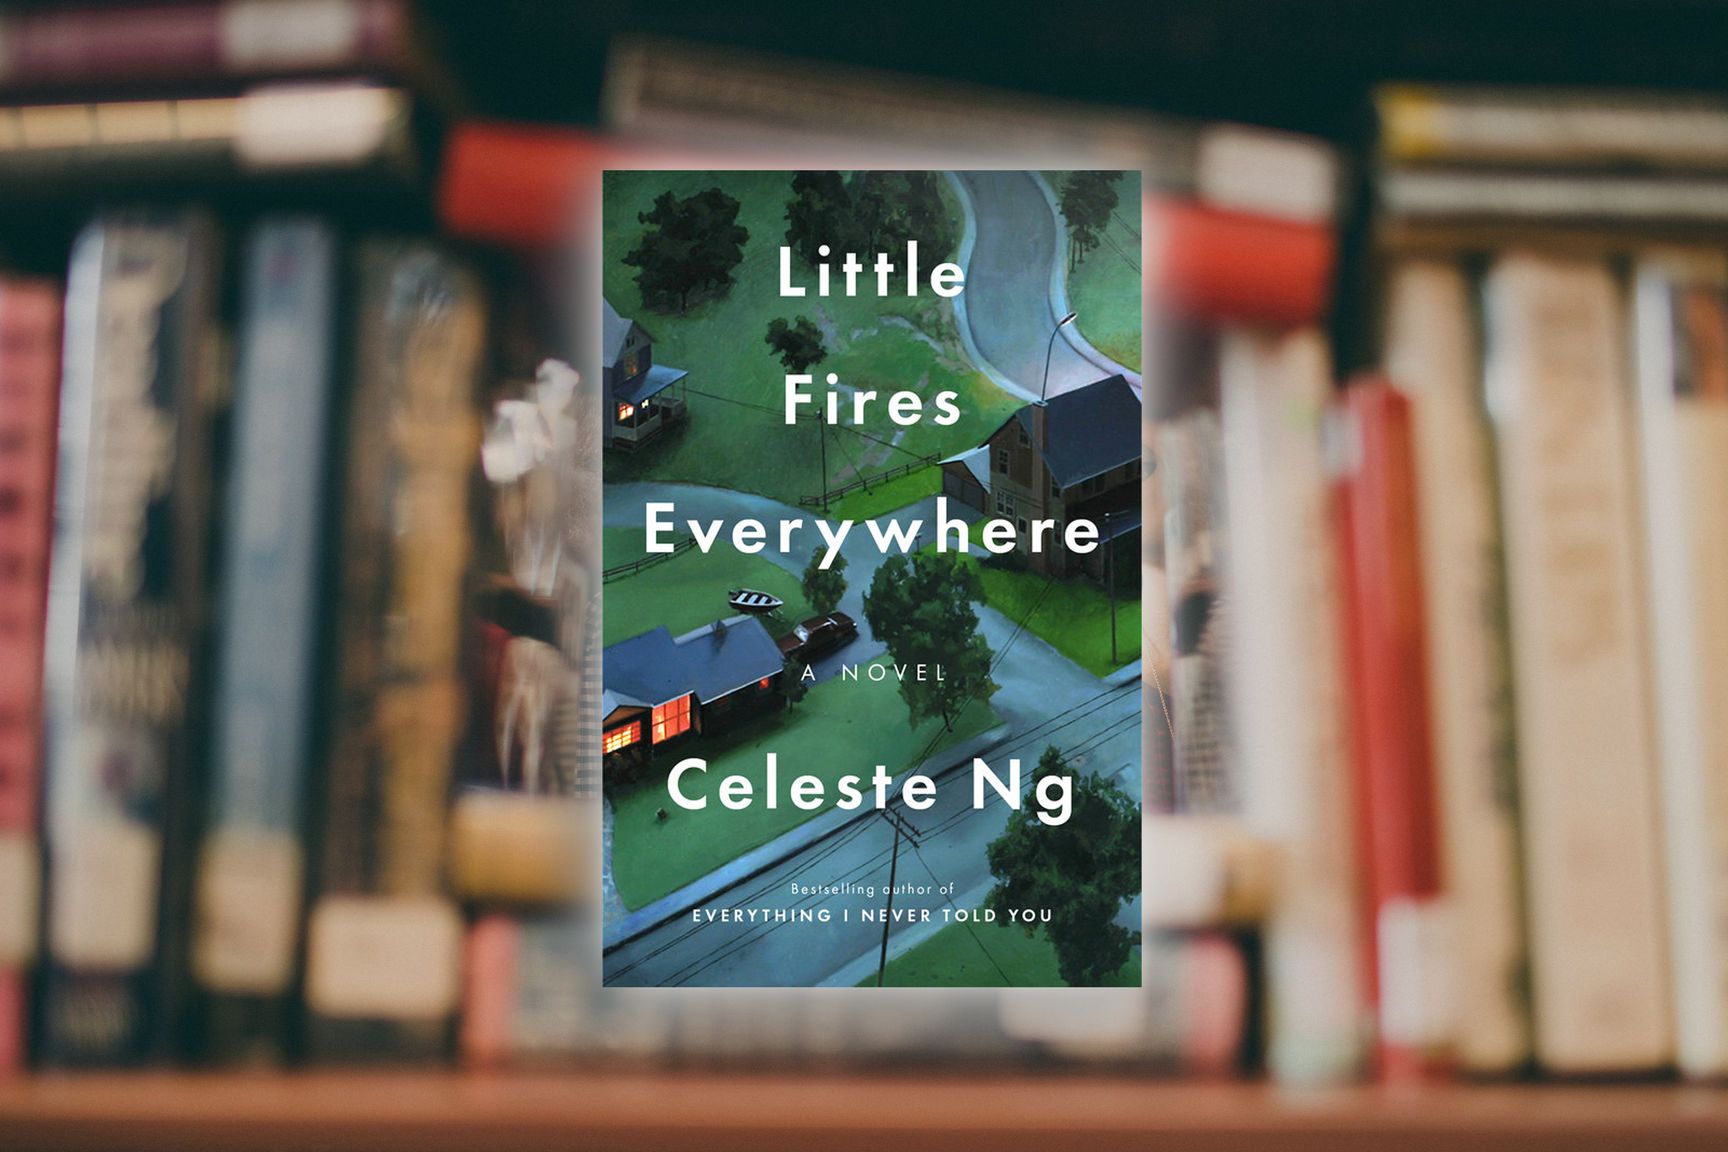 Hulu exclusive: Little Fires Everywhere by Celeste Ng